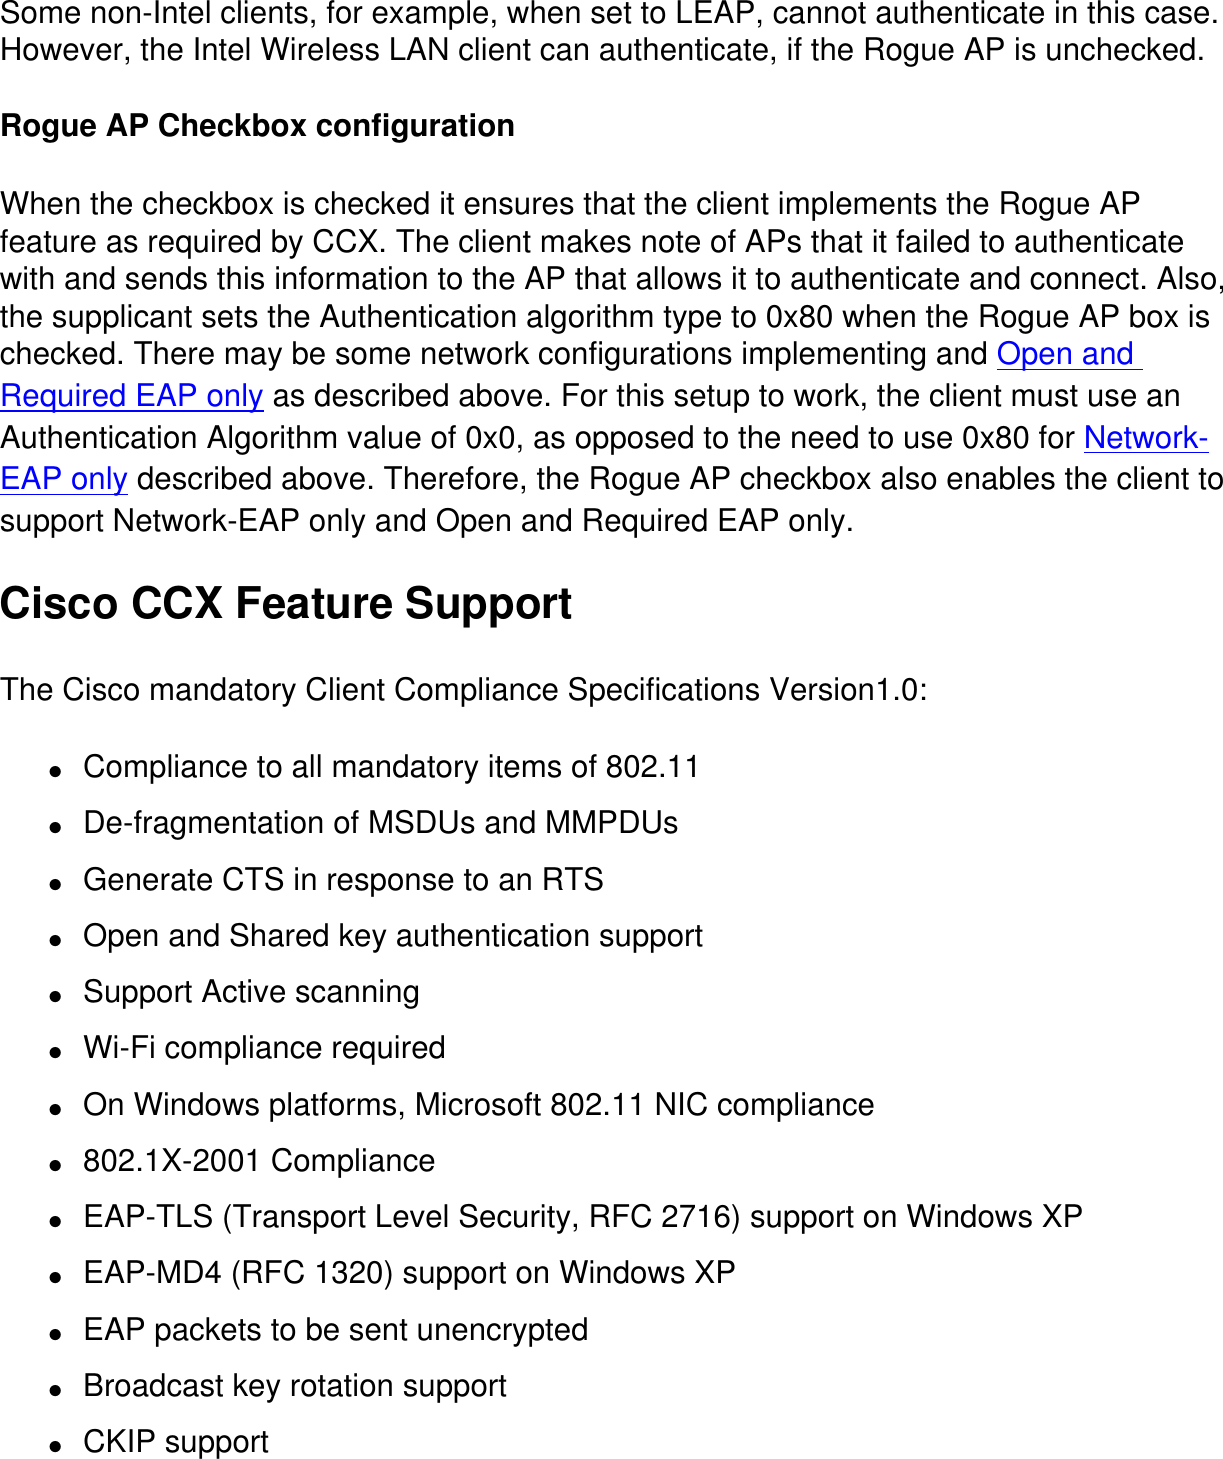 Some non-Intel clients, for example, when set to LEAP, cannot authenticate in this case. However, the Intel Wireless LAN client can authenticate, if the Rogue AP is unchecked.  Rogue AP Checkbox configurationWhen the checkbox is checked it ensures that the client implements the Rogue AP feature as required by CCX. The client makes note of APs that it failed to authenticate with and sends this information to the AP that allows it to authenticate and connect. Also, the supplicant sets the Authentication algorithm type to 0x80 when the Rogue AP box is checked. There may be some network configurations implementing and Open and Required EAP only as described above. For this setup to work, the client must use an Authentication Algorithm value of 0x0, as opposed to the need to use 0x80 for Network-EAP only described above. Therefore, the Rogue AP checkbox also enables the client to support Network-EAP only and Open and Required EAP only. Cisco CCX Feature SupportThe Cisco mandatory Client Compliance Specifications Version1.0:●     Compliance to all mandatory items of 802.11●     De-fragmentation of MSDUs and MMPDUs●     Generate CTS in response to an RTS●     Open and Shared key authentication support●     Support Active scanning●     Wi-Fi compliance required●     On Windows platforms, Microsoft 802.11 NIC compliance●     802.1X-2001 Compliance●     EAP-TLS (Transport Level Security, RFC 2716) support on Windows XP●     EAP-MD4 (RFC 1320) support on Windows XP●     EAP packets to be sent unencrypted●     Broadcast key rotation support●     CKIP support